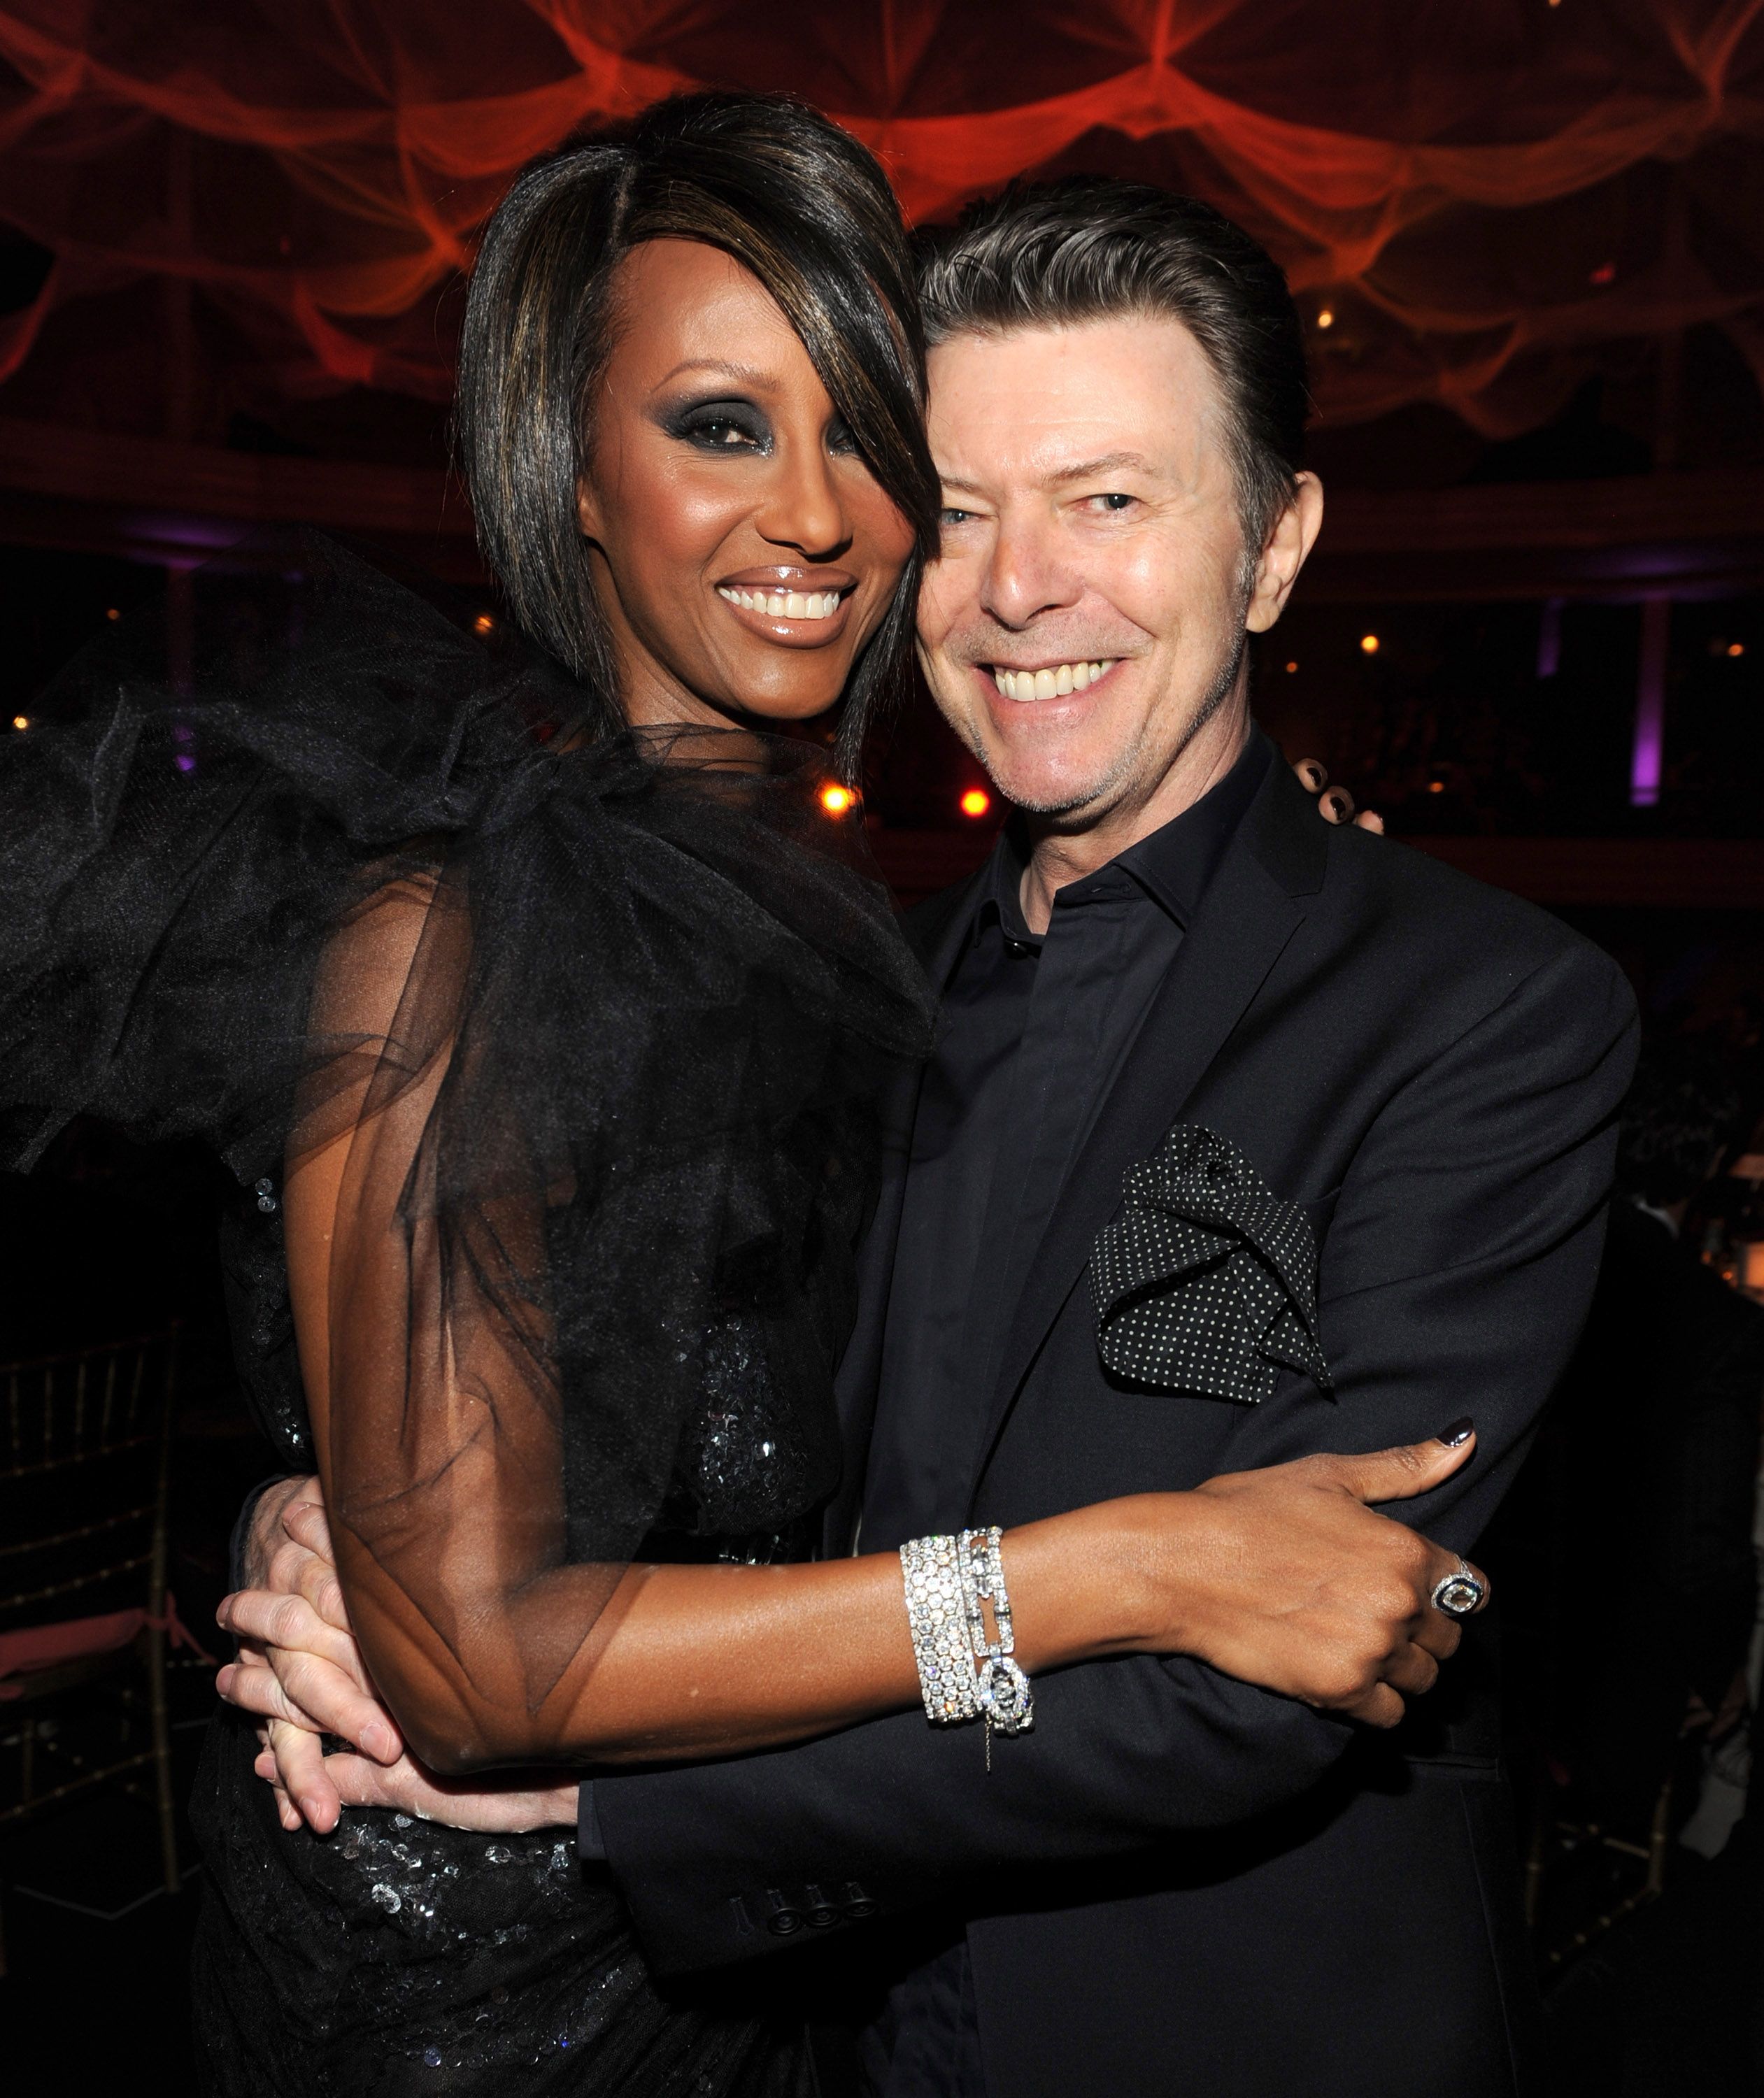 Iman and David Bowie October 15, 2009 in New York City | Source: Getty Images